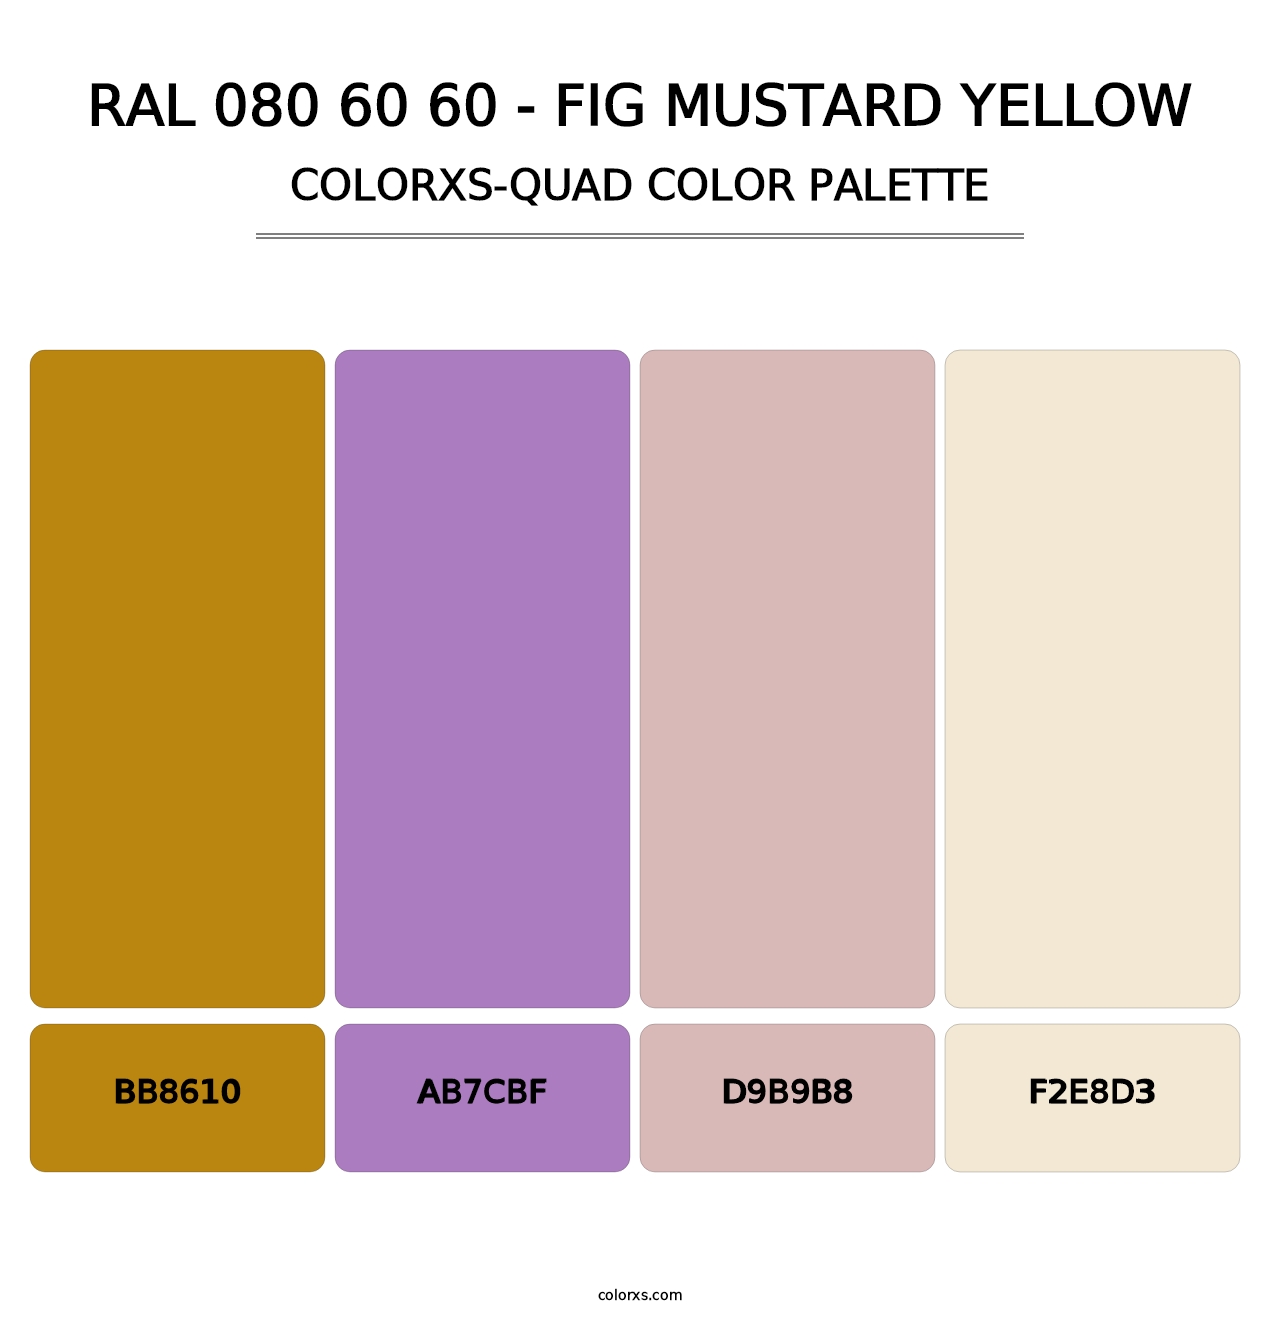 RAL 080 60 60 - Fig Mustard Yellow - Colorxs Quad Palette